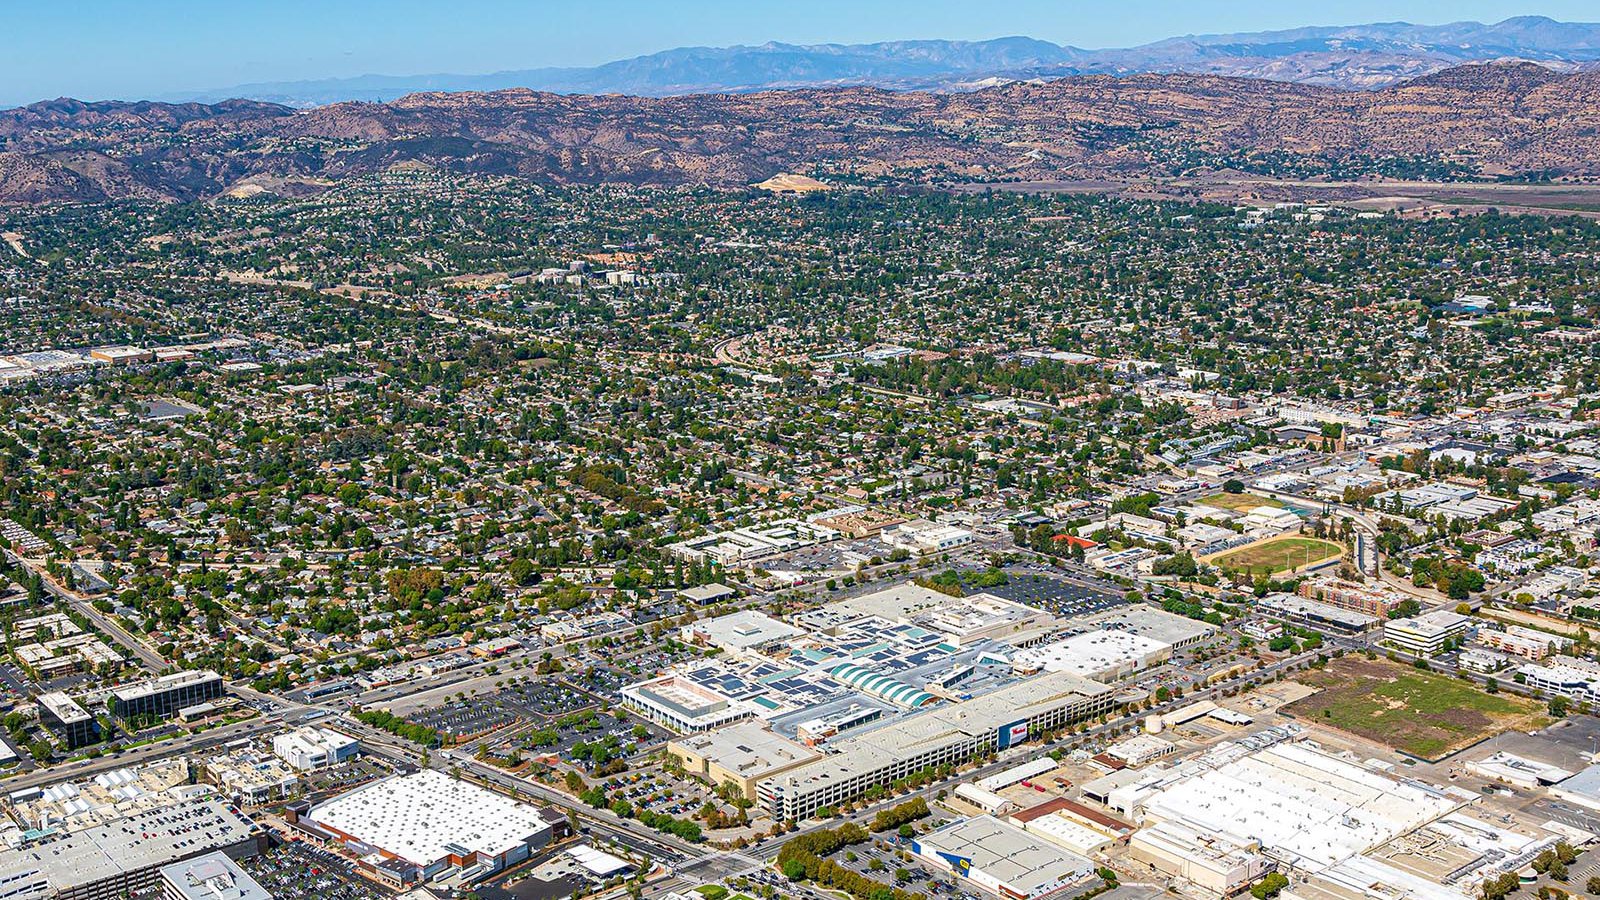 Commercial photo of the Westfield Topanga & The Village shopping center in Canoga Park, California